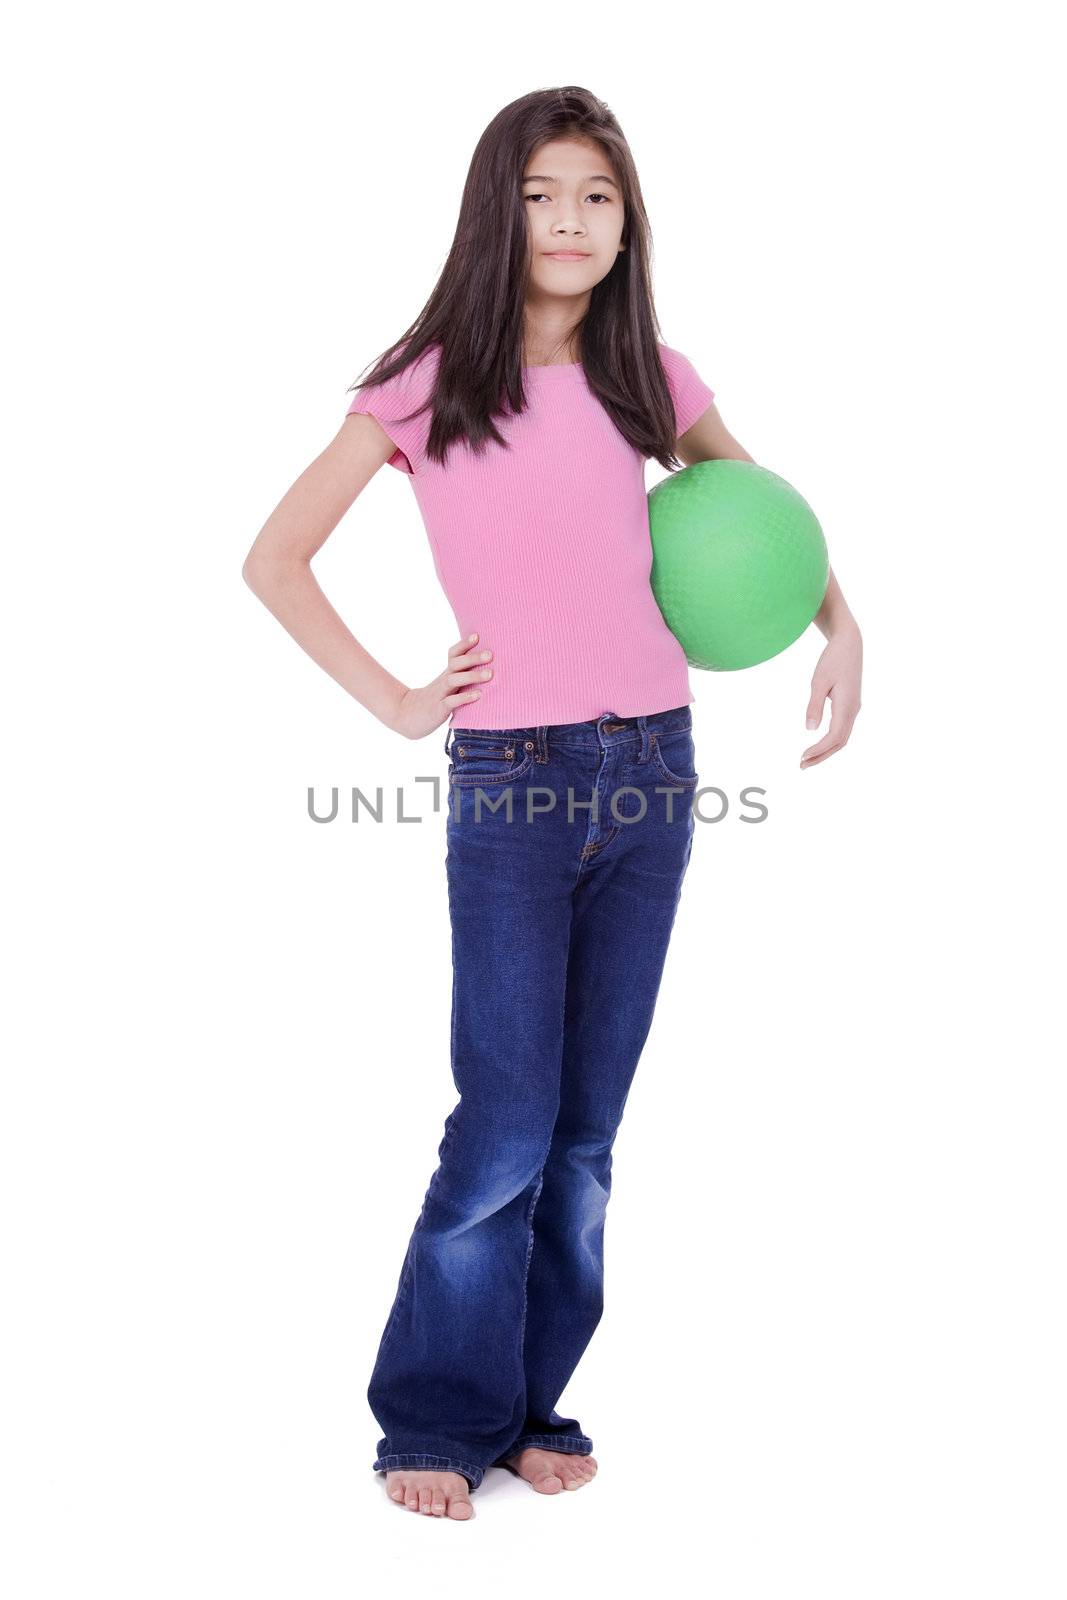 Ten year old Asian girl holding green ball with challenging stance, isolated on white